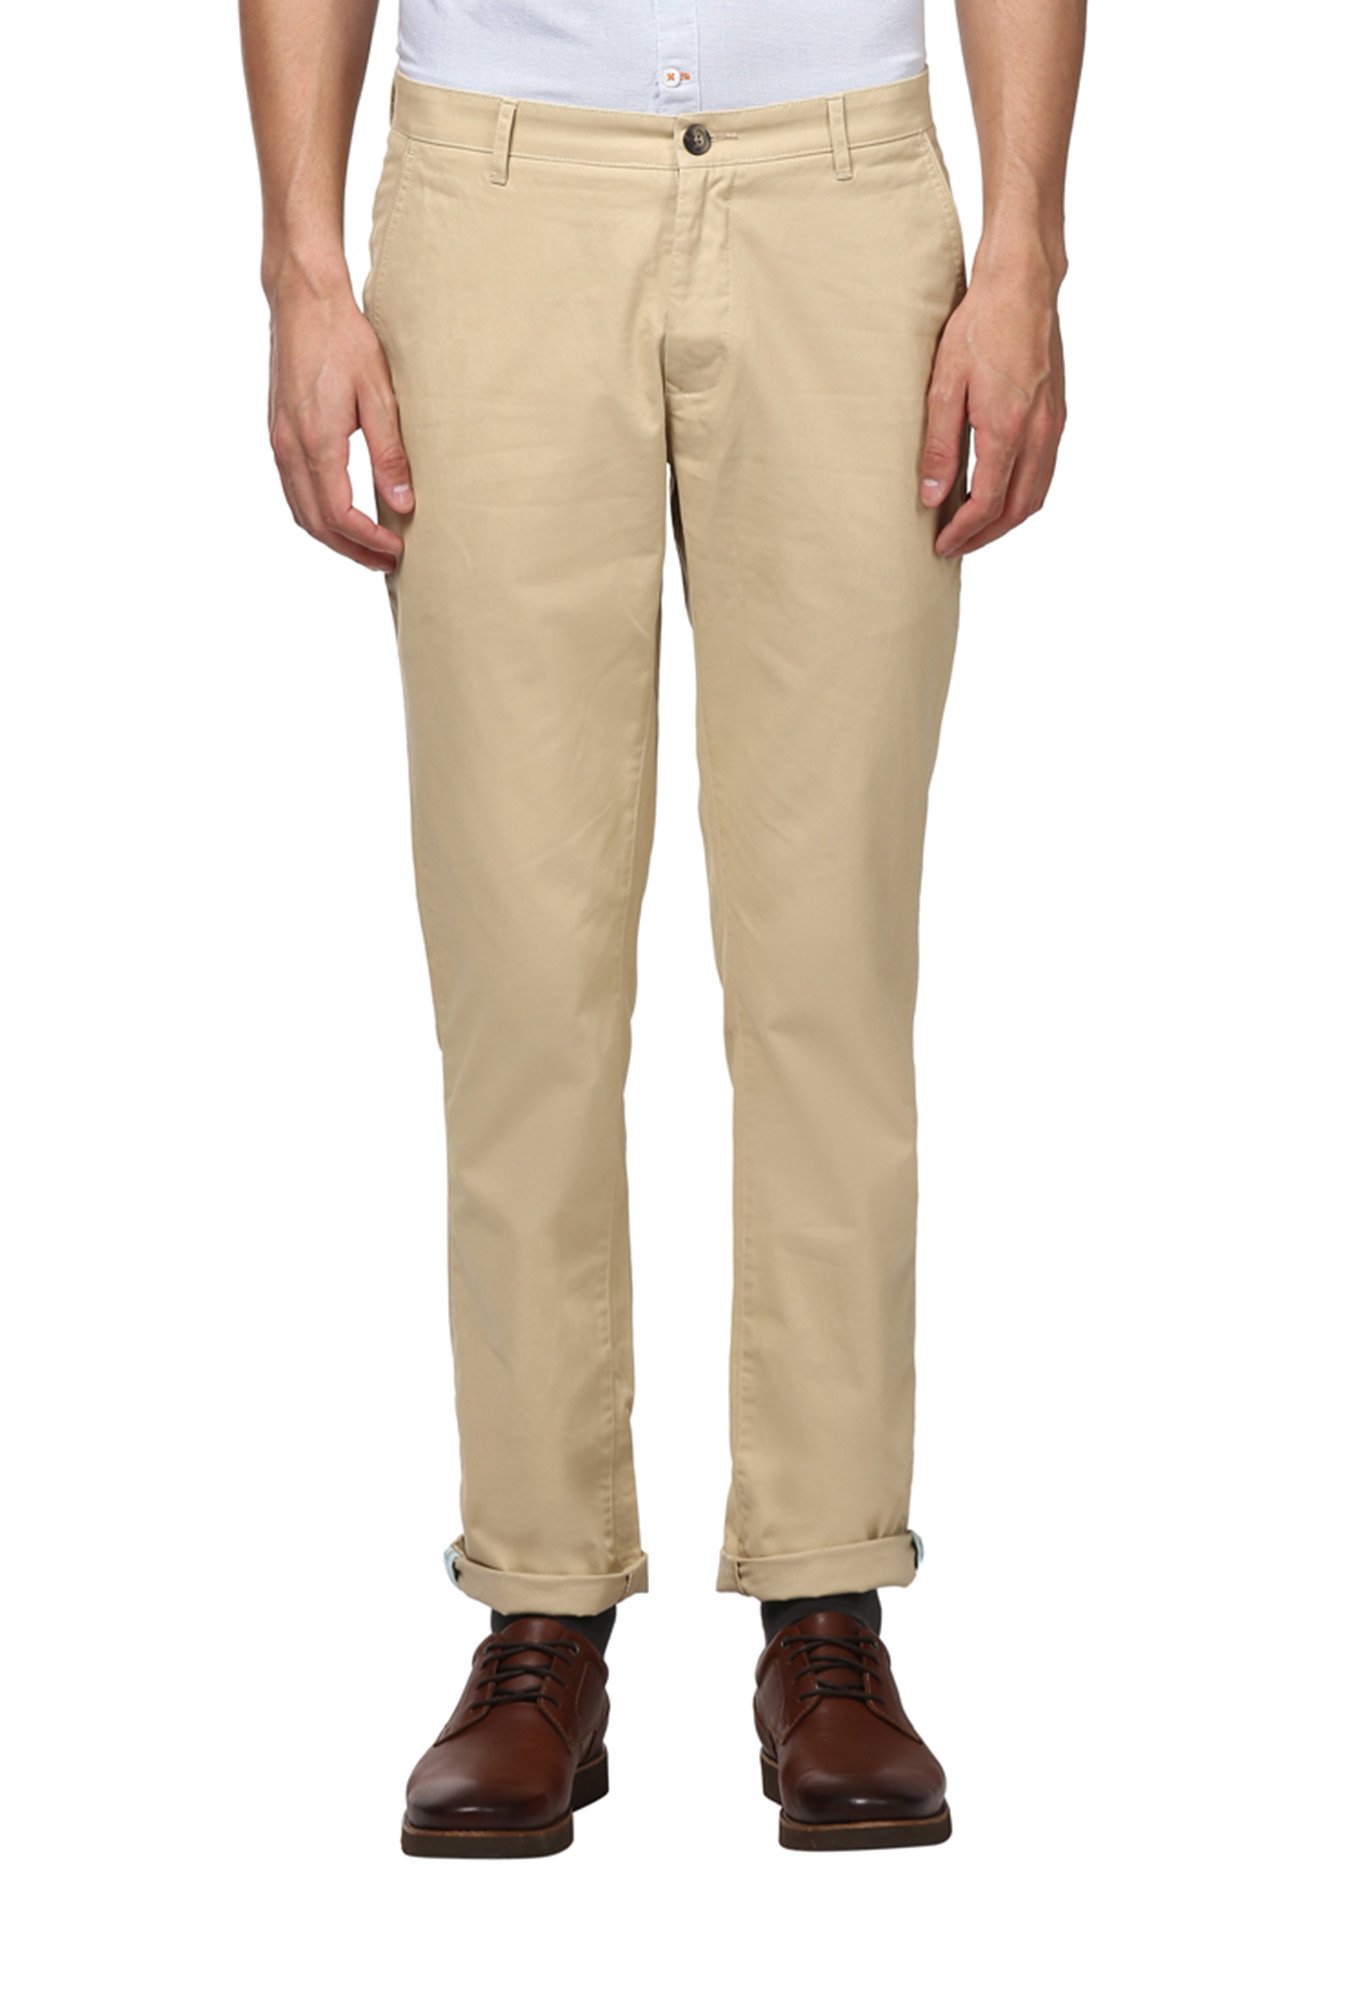 COLORPLUS Men Solid Super Slim Fit Casual Trousers | Lifestyle Stores |  Sector 4C | Greater Noida